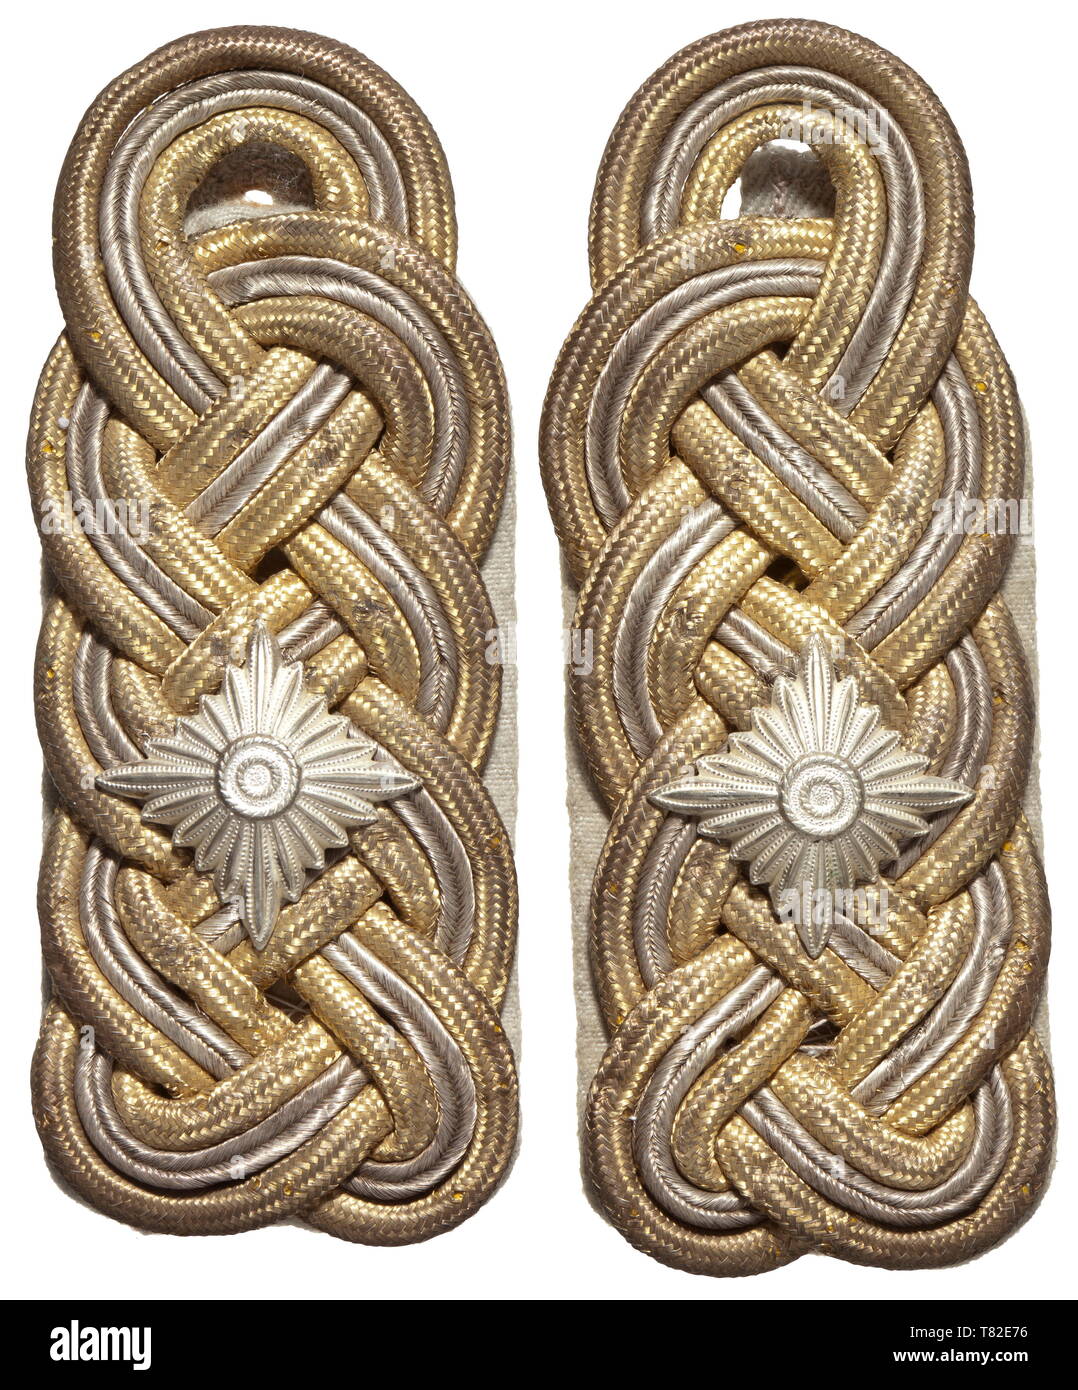 A pair of shoulder boards for 'SS-Gruppenführer' and 'Generalleutnant'of the Waffen-SS Gold-silver interwoven cords on mouse-grey wool underlay (heavy type), with rear loop, used. historic, historical, 20th century, 1930s, 1940s, Waffen-SS, armed division of the SS, armed service, armed services, NS, National Socialism, Nazism, Third Reich, German Reich, Germany, military, militaria, utensil, piece of equipment, utensils, object, objects, stills, clipping, clippings, cut out, cut-out, cut-outs, fascism, fascistic, National Socialist, Nazi, Nazi period, Editorial-Use-Only Stock Photo